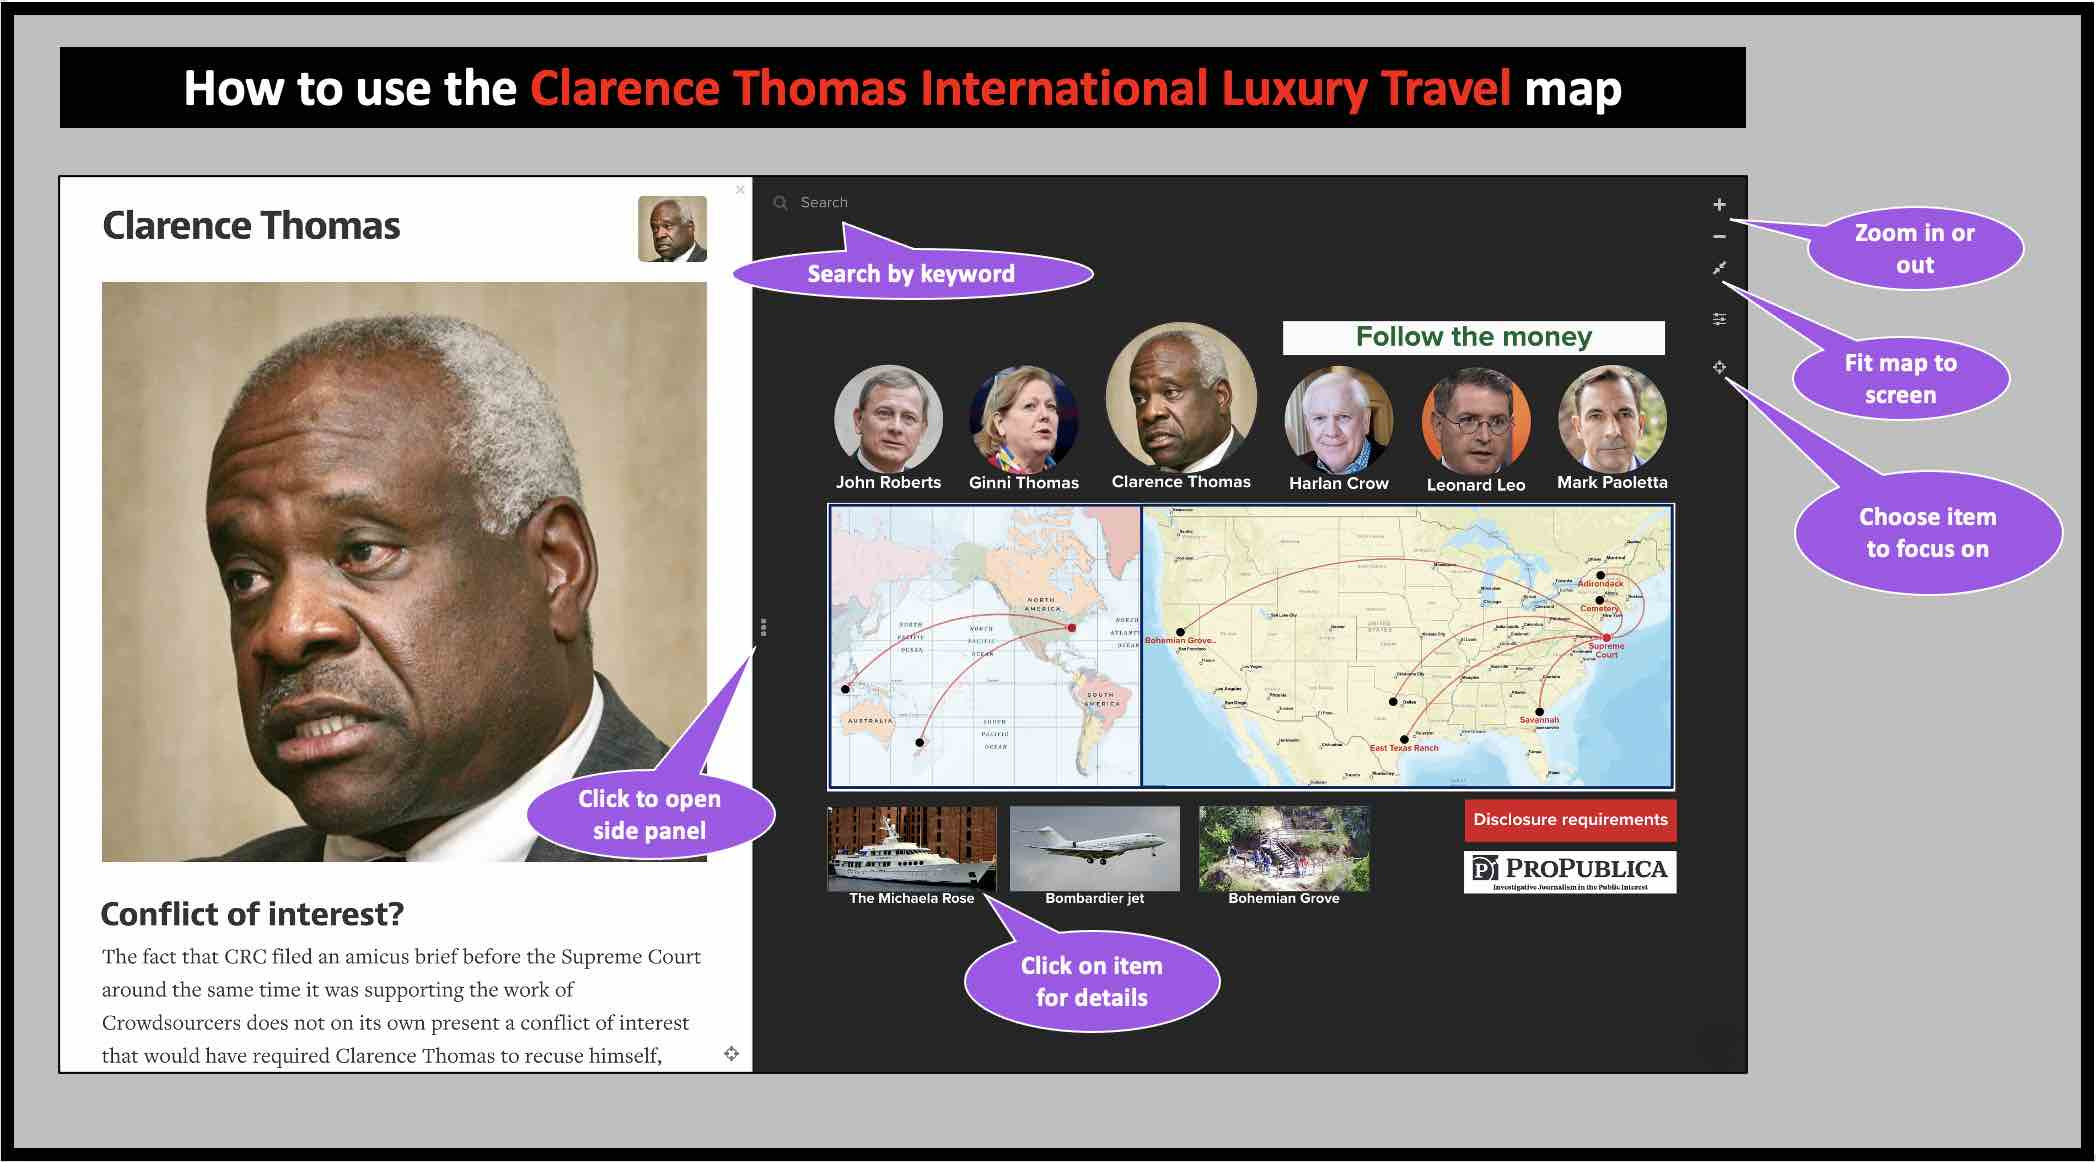 How to use the Clarence Thomas international luxury travel map